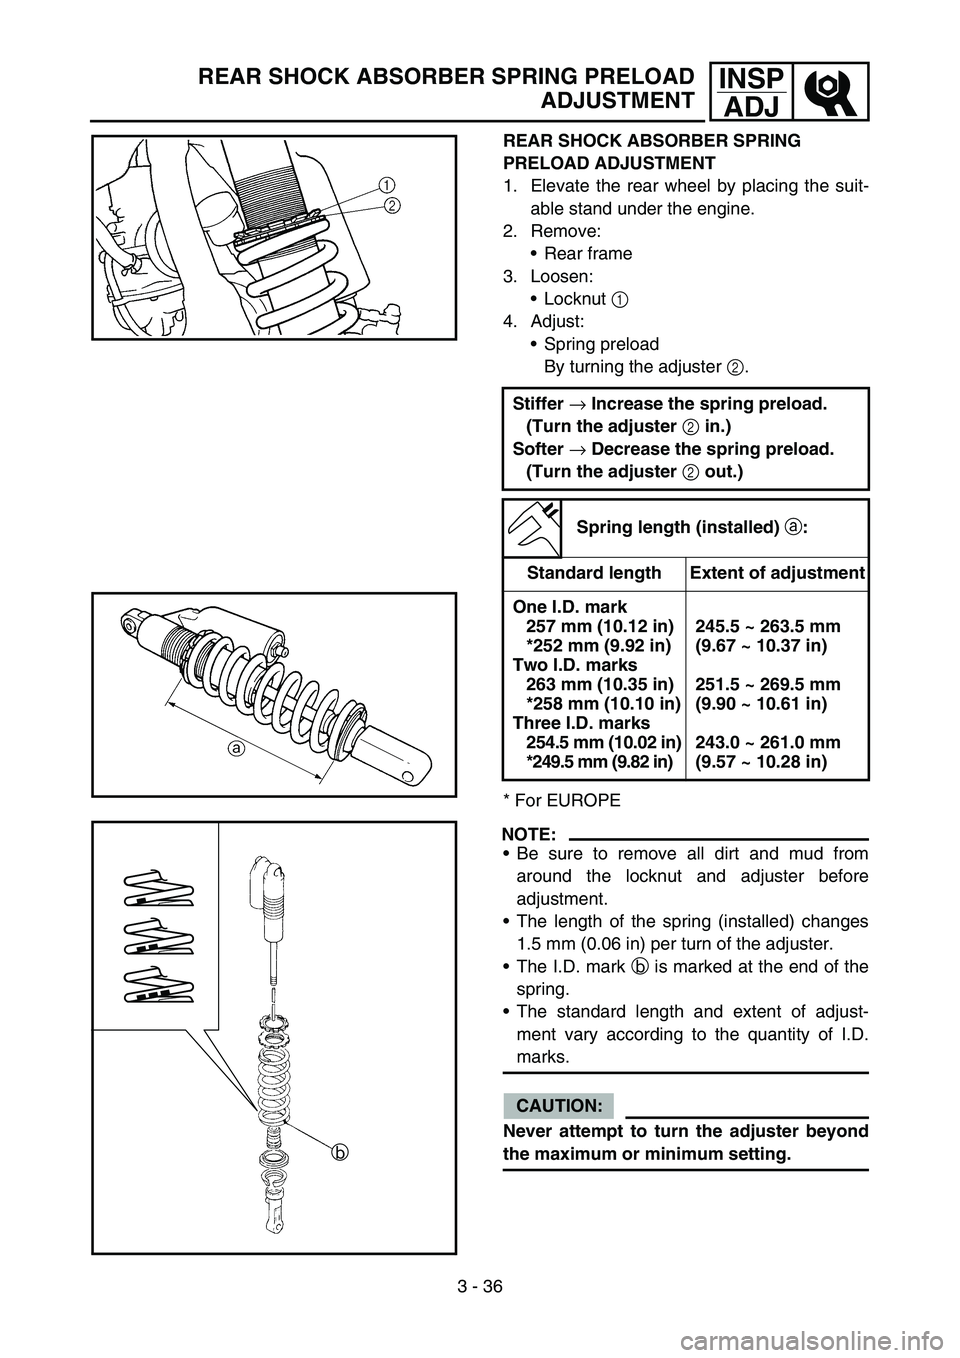 YAMAHA YZ250F 2007  Notices Demploi (in French) 3 - 36
INSP
ADJREAR SHOCK ABSORBER SPRING PRELOAD
ADJUSTMENT
REAR SHOCK ABSORBER SPRING 
PRELOAD ADJUSTMENT
1. Elevate the rear wheel by placing the suit-
able stand under the engine.
2. Remove:
Rear